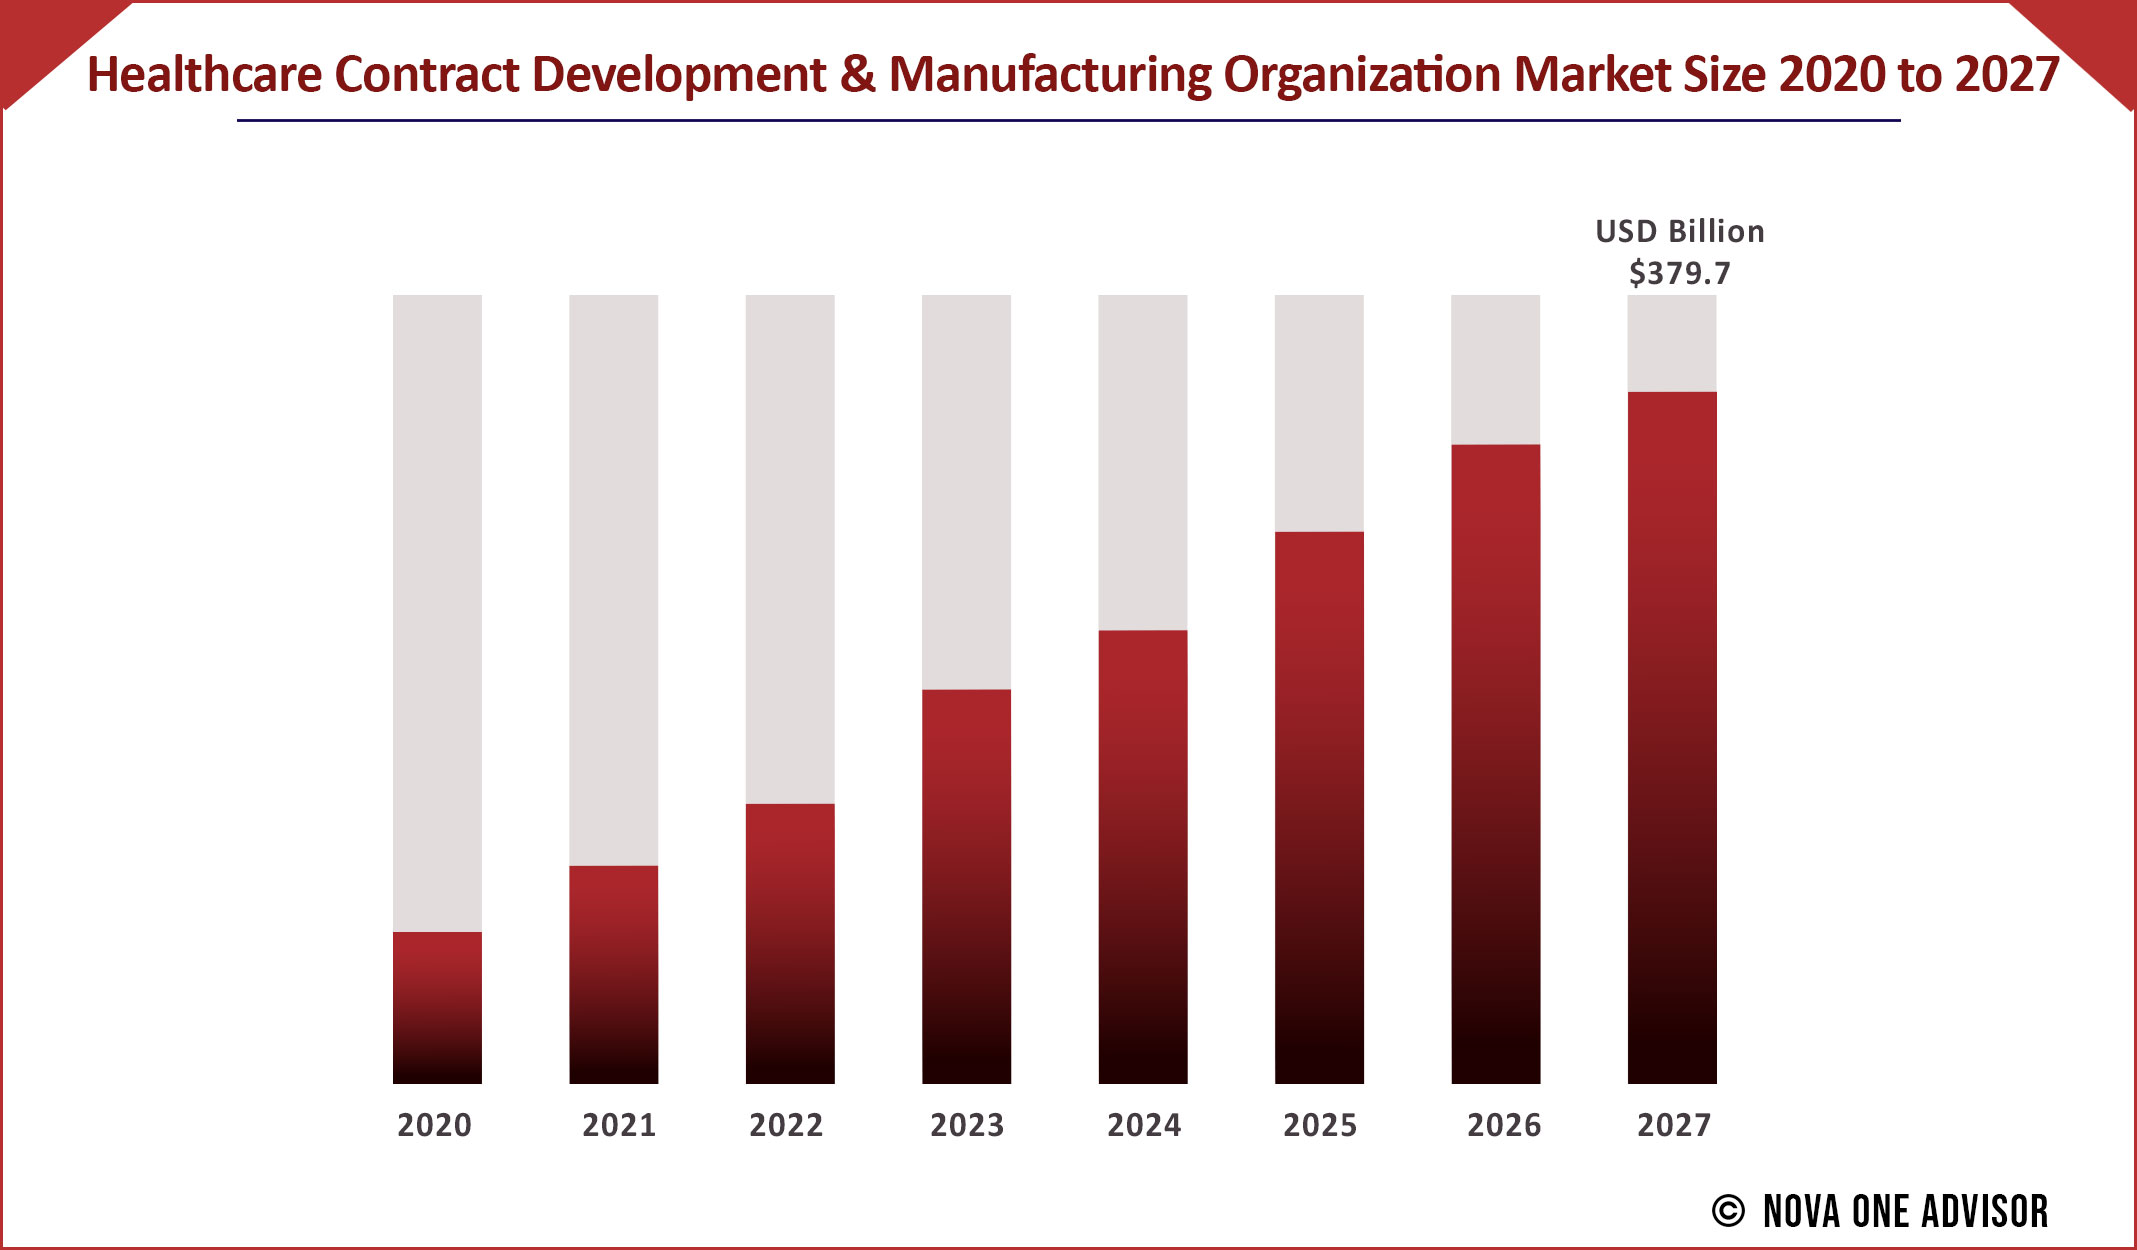 Healthcare Contract Development And Manufacturing Organization Market Size 2020 to 2027